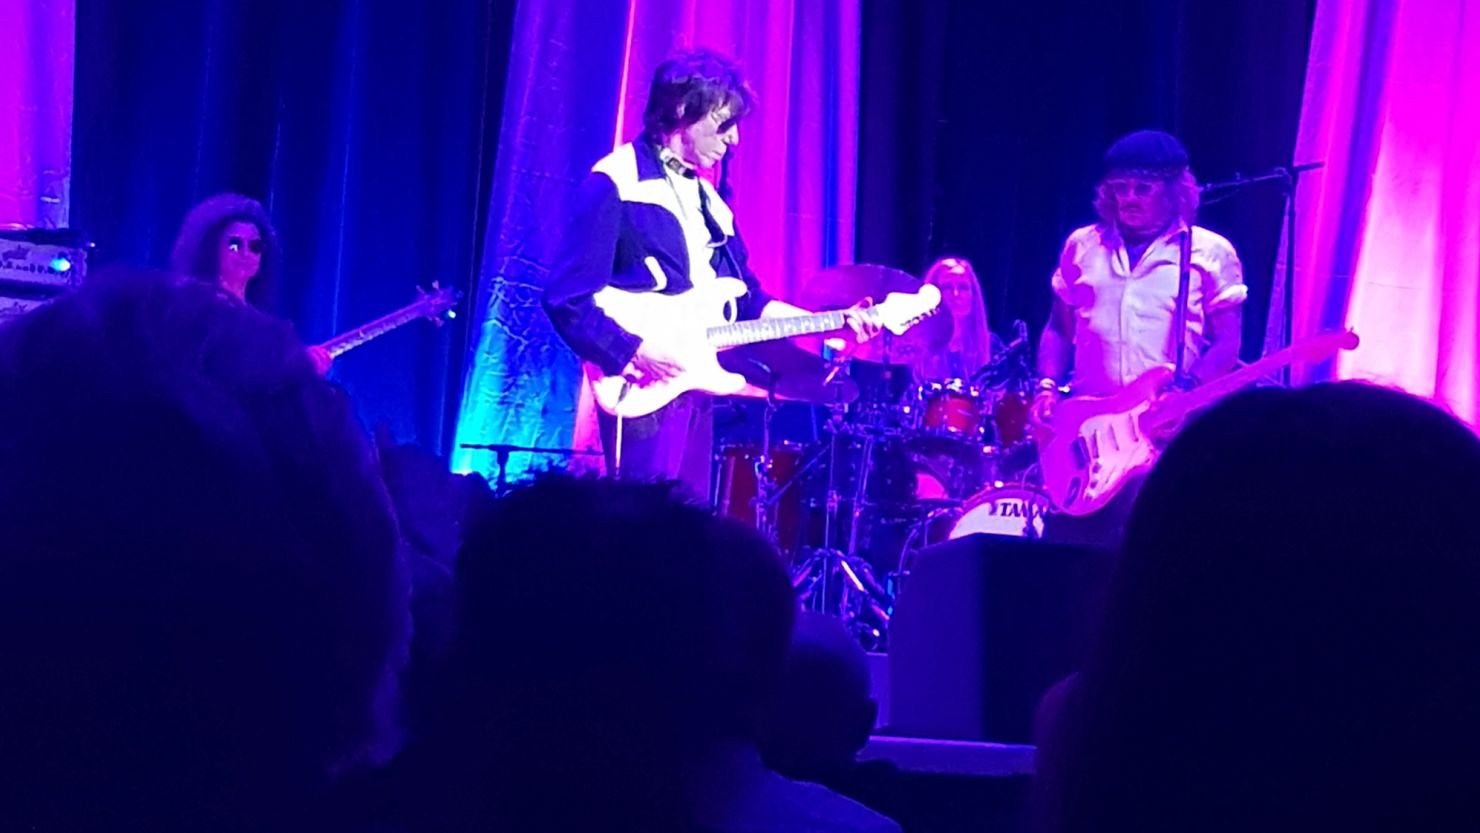 Johnny Depp joins musician Jeff Beck on stage during a concert in England on May 29.